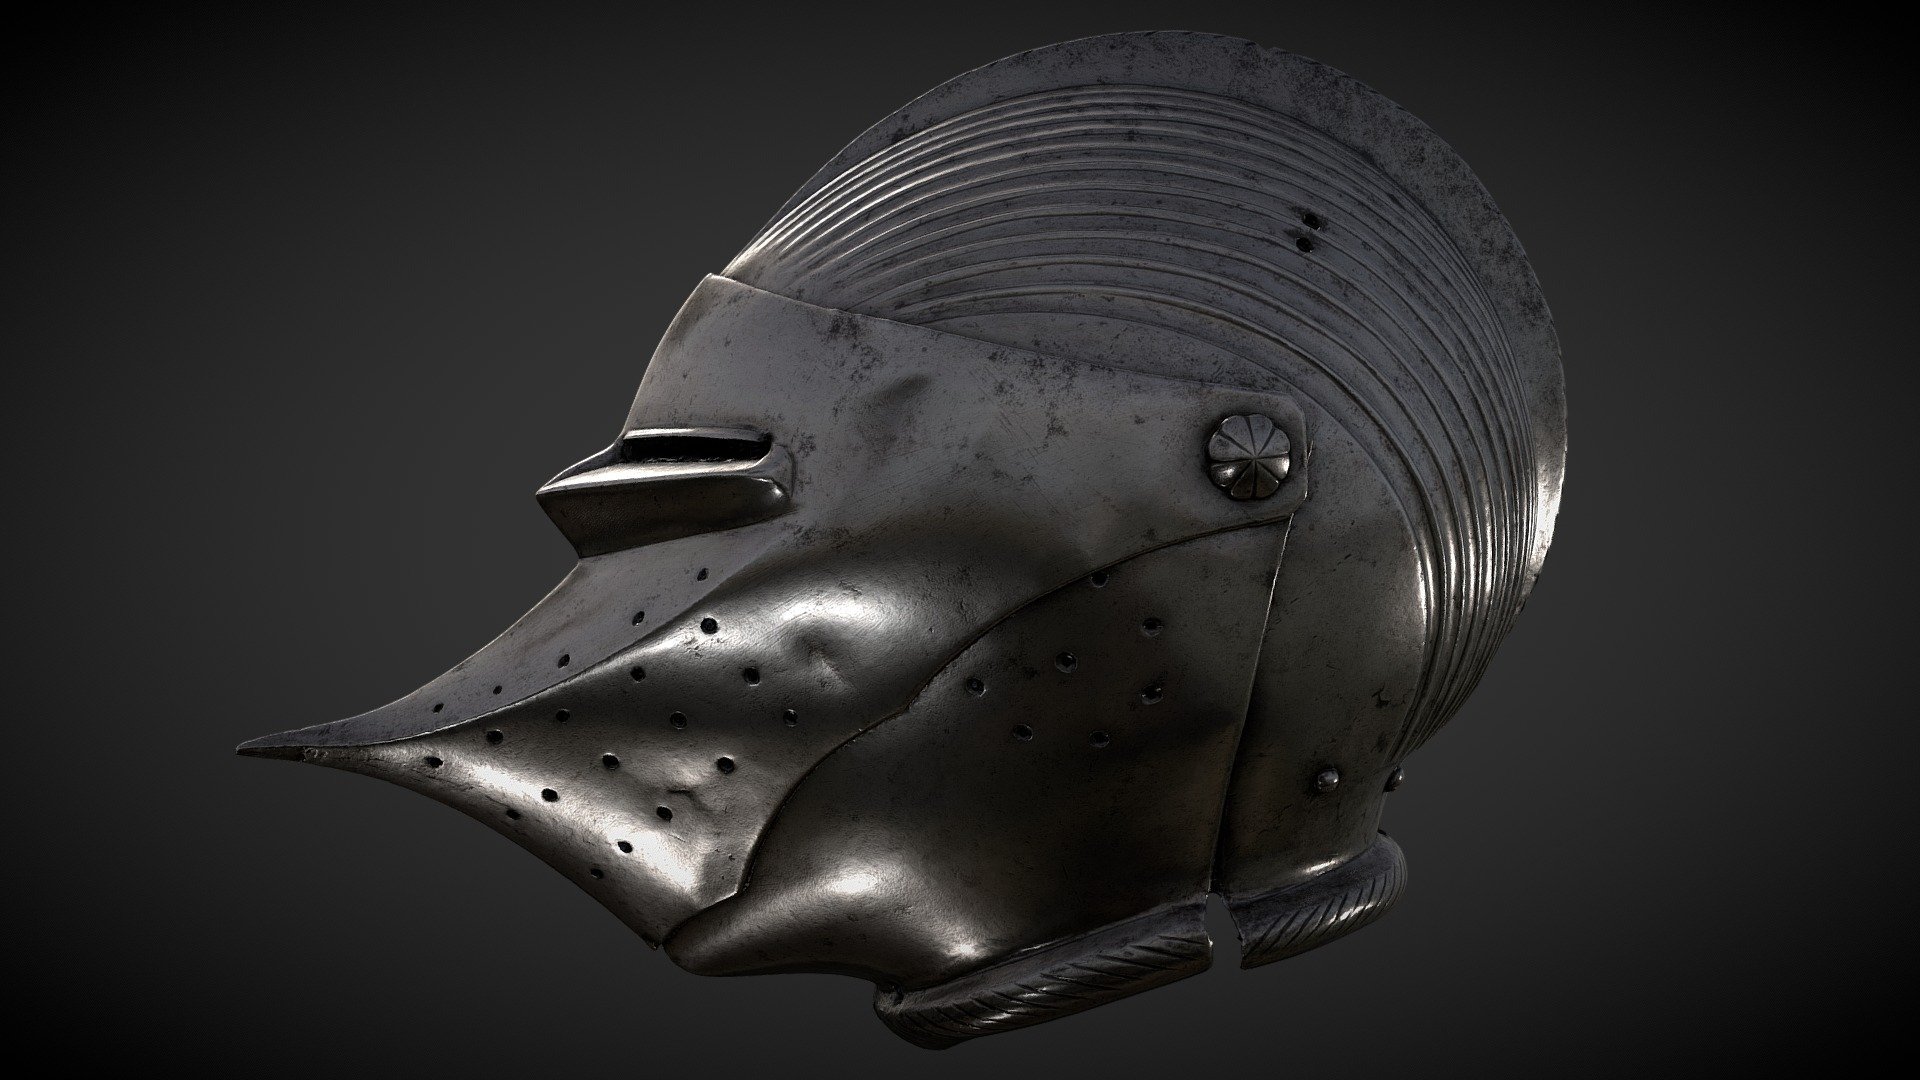 This helmet features decorative grooves on the skull and the visor has been extended into a beak.

As late as in 1866, the helmet was thought to have belonged to King Magnus Ladulås (dead in 1290) and was on display in the Riddarholmen Church together with a suit of armour consisting of unrelated parts.

However, King Magnus would never have come across the helmet which was made in Germany in the 1530s 3d model